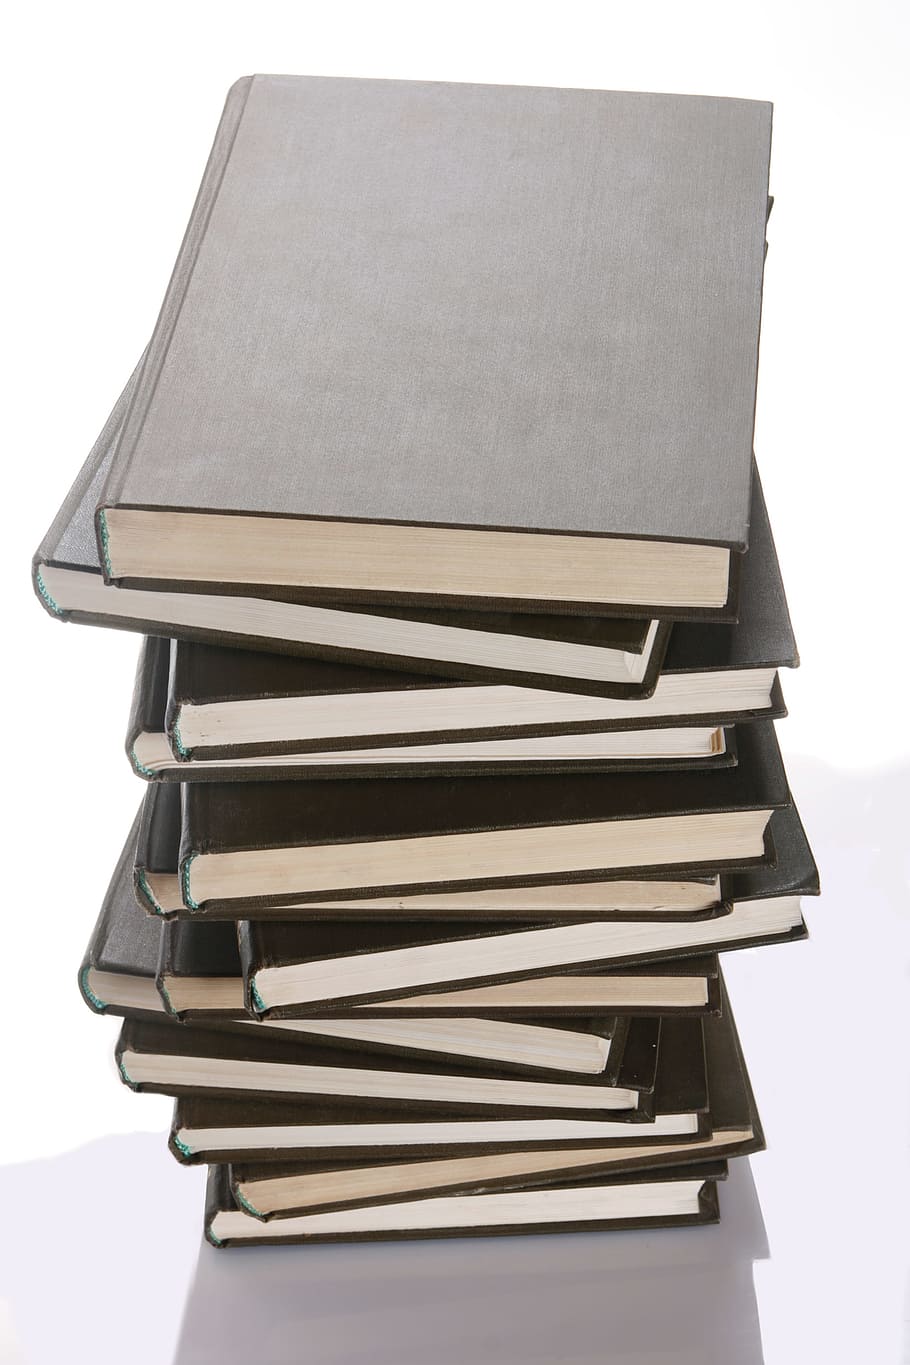 book, books, education, encyclopedia, heap, information, isolated, knowledge, literature, stack